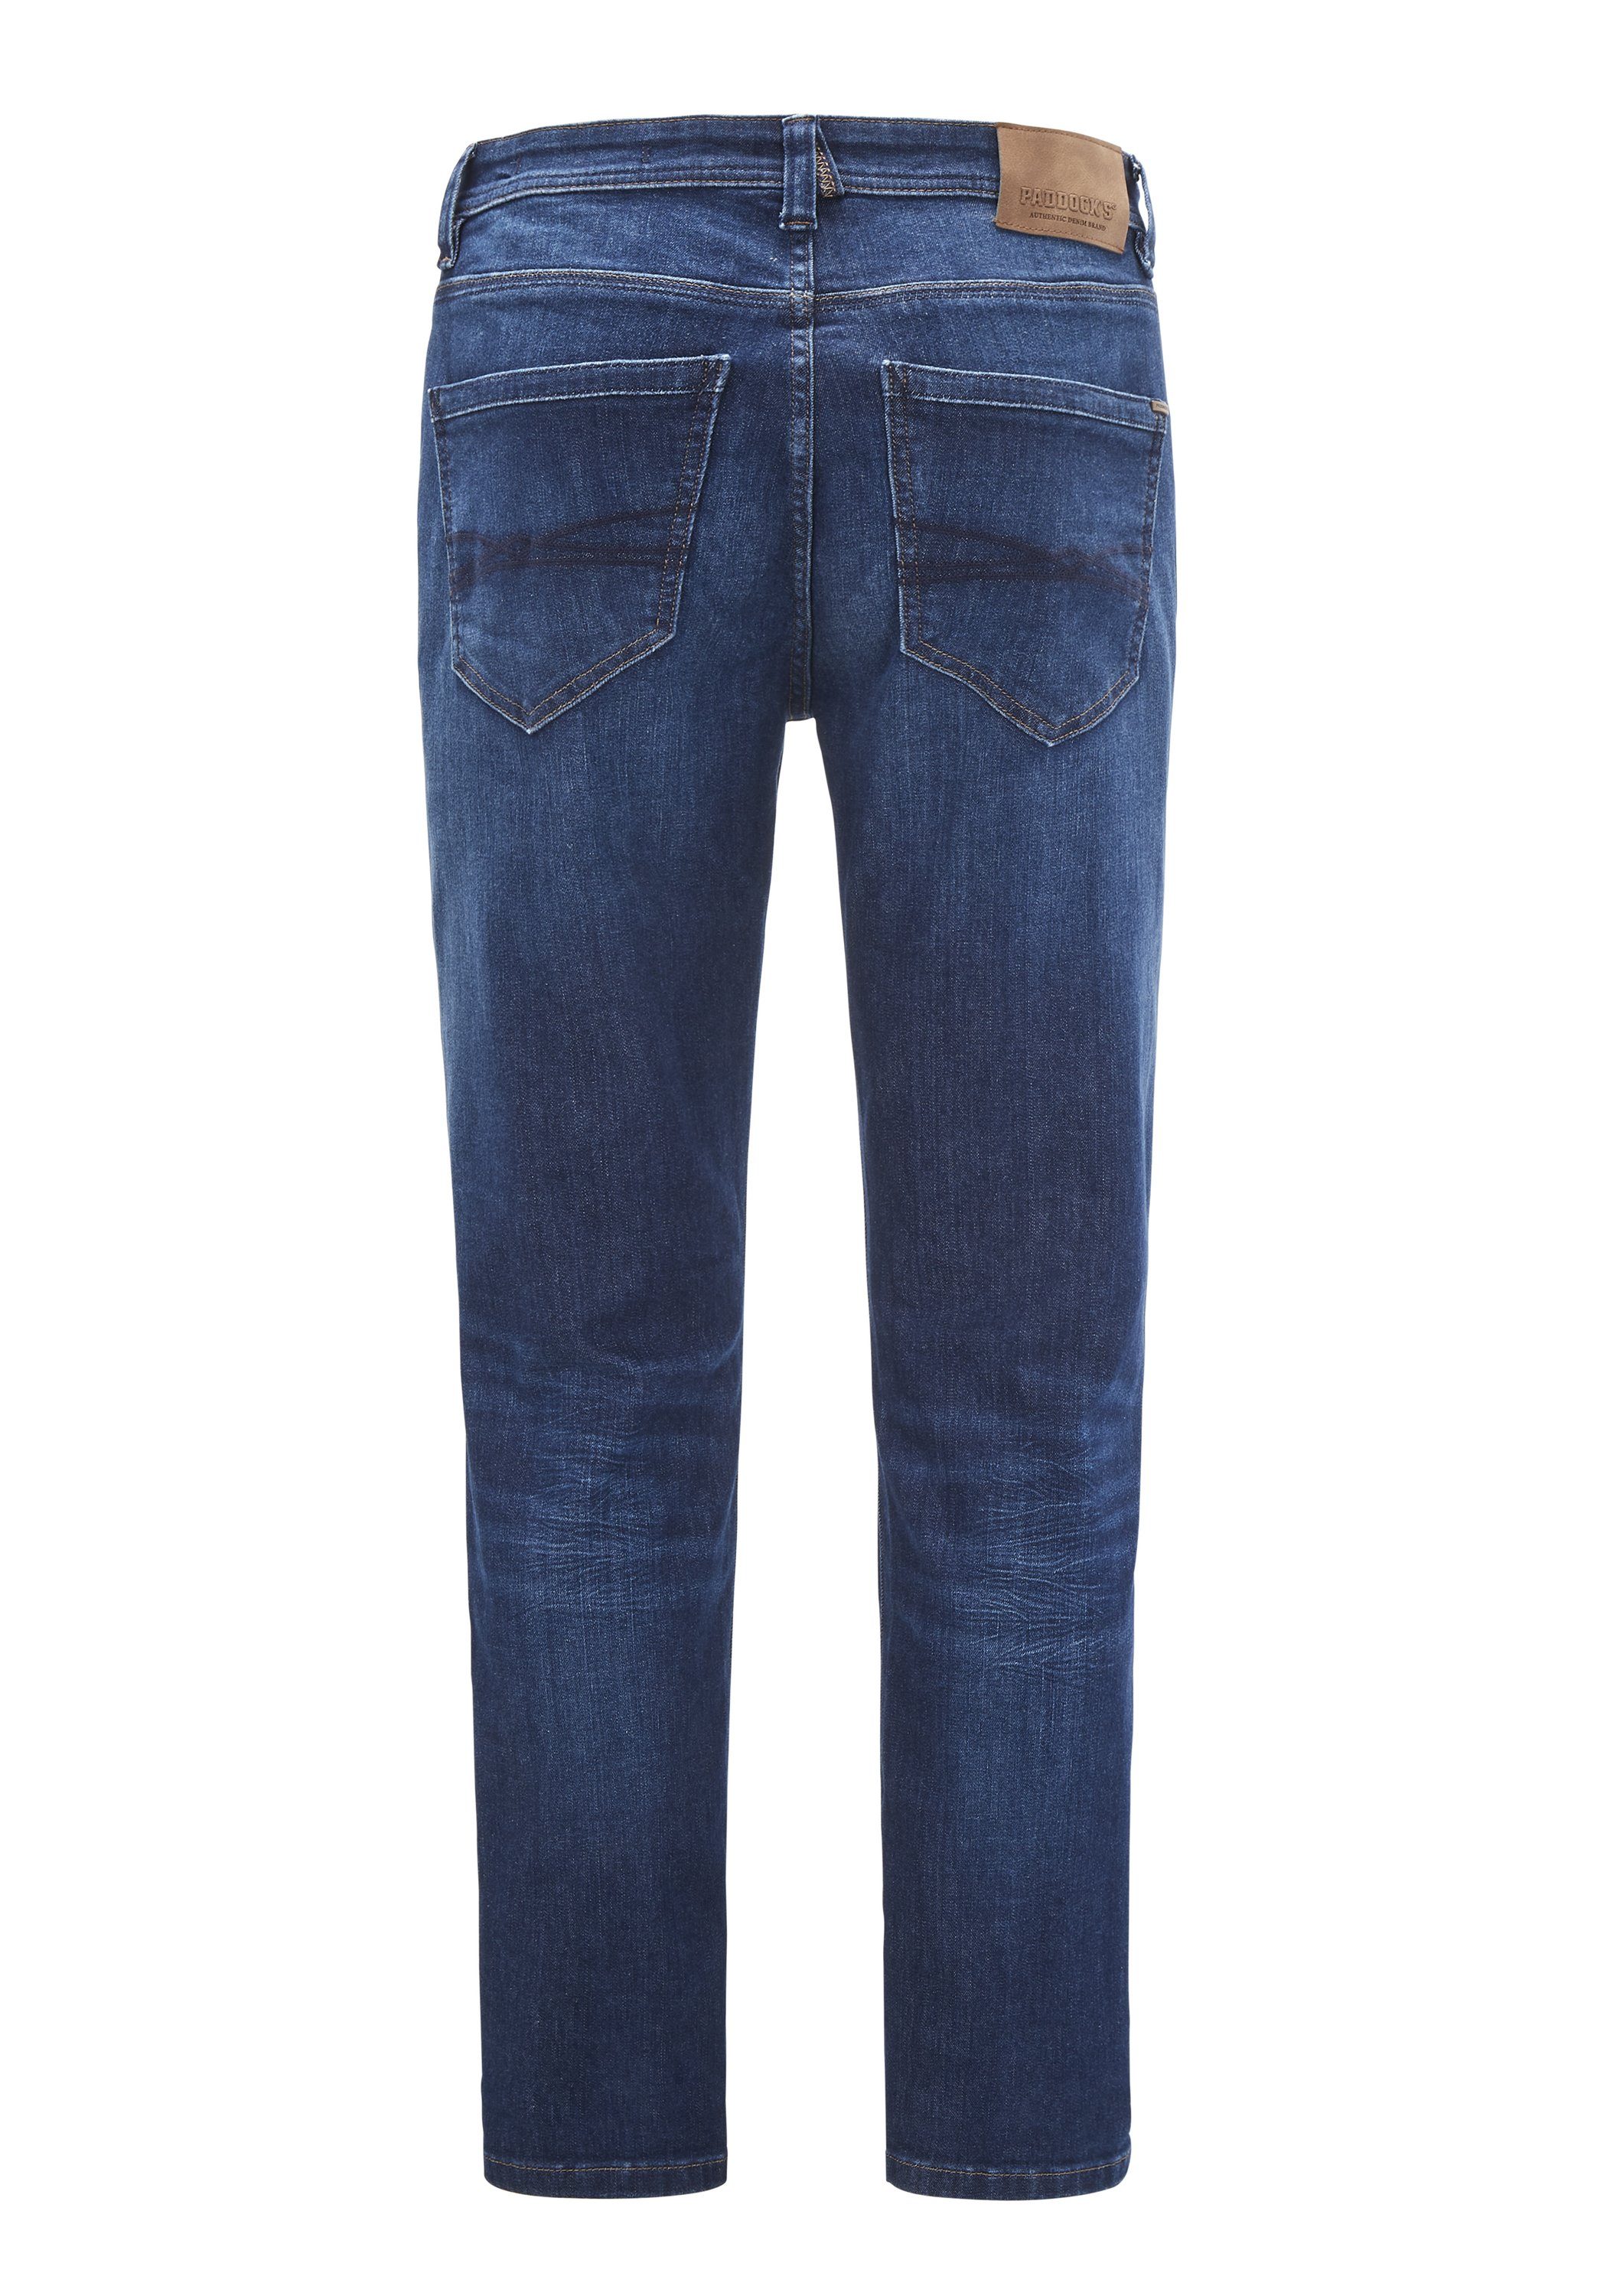 Paddock's Tapered-fit-Jeans RAY blue vintage Comfort & Stretch wash Motion dark